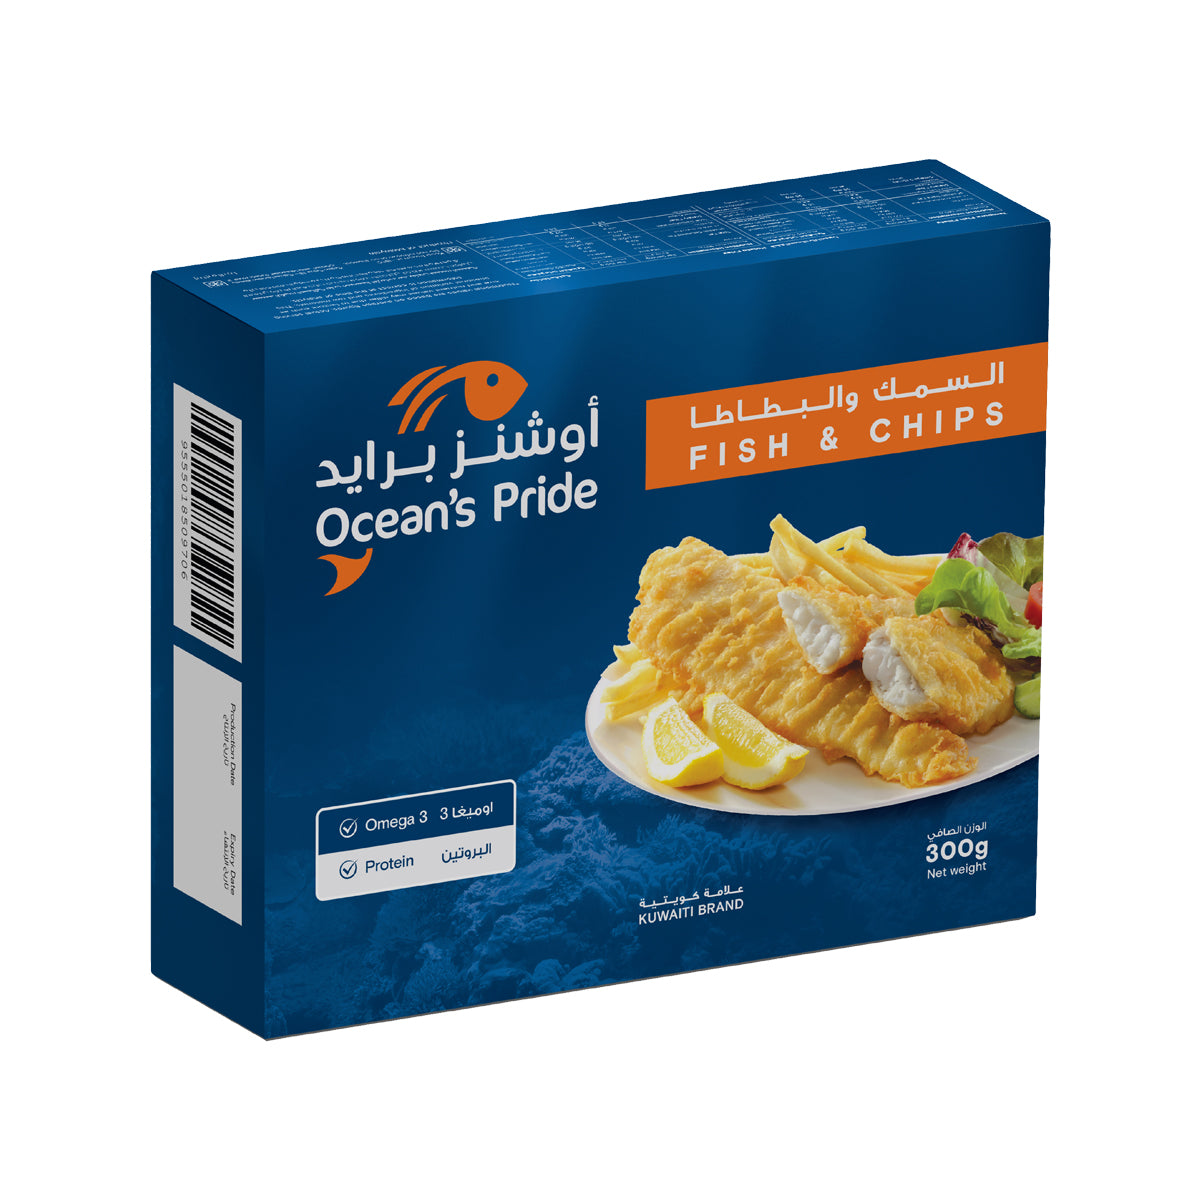 Fish & Chips 300g